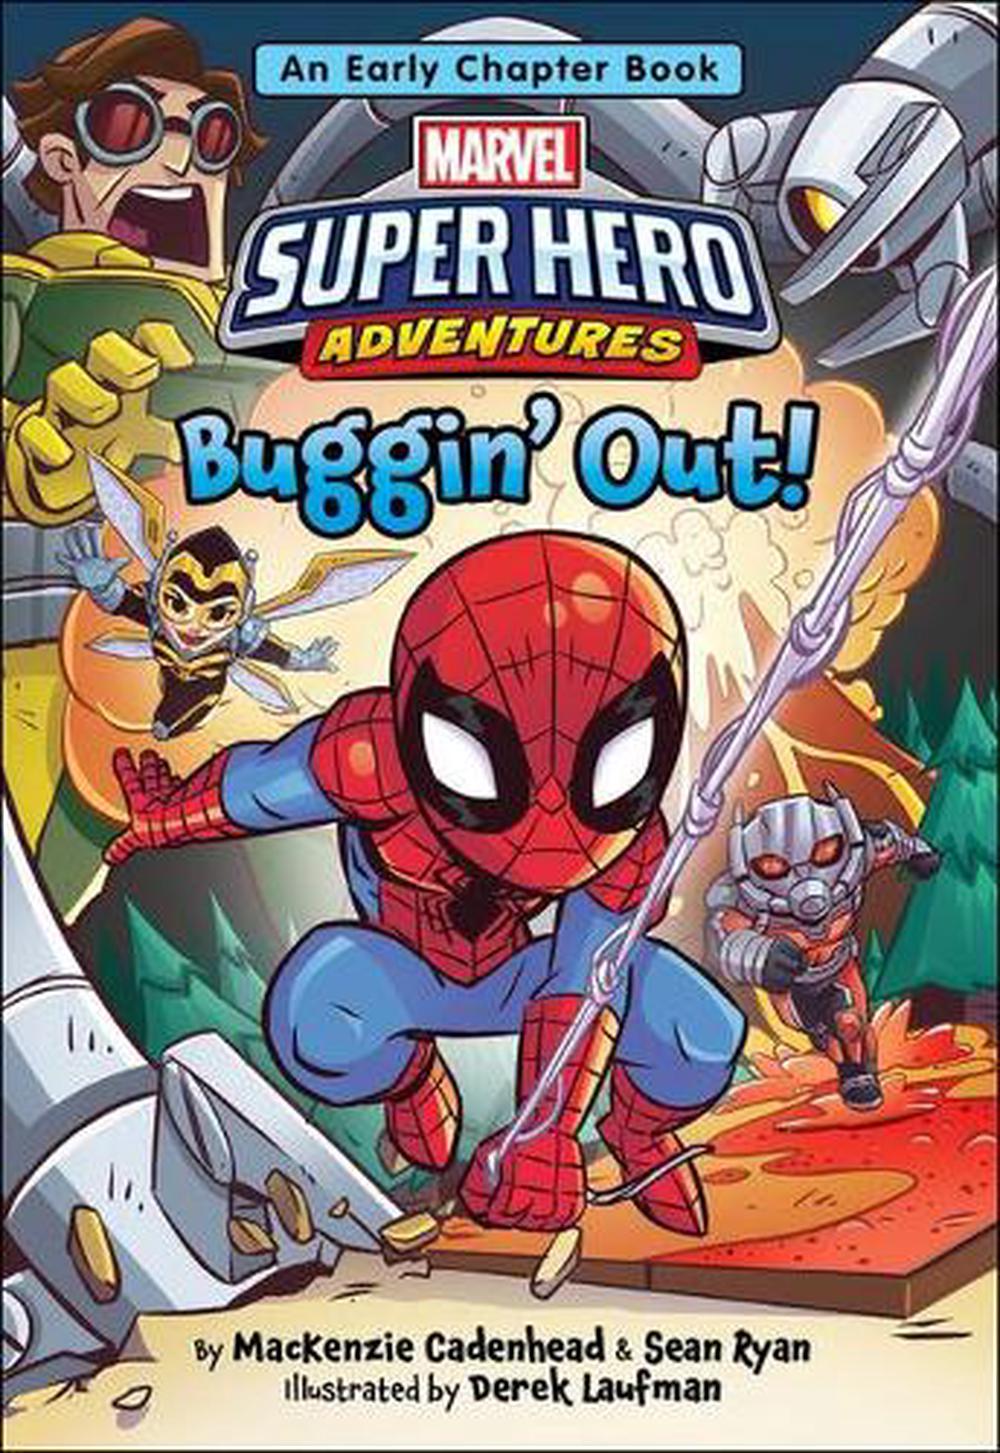 Marvel Super Hero Adventures Buggin' Out! An Early